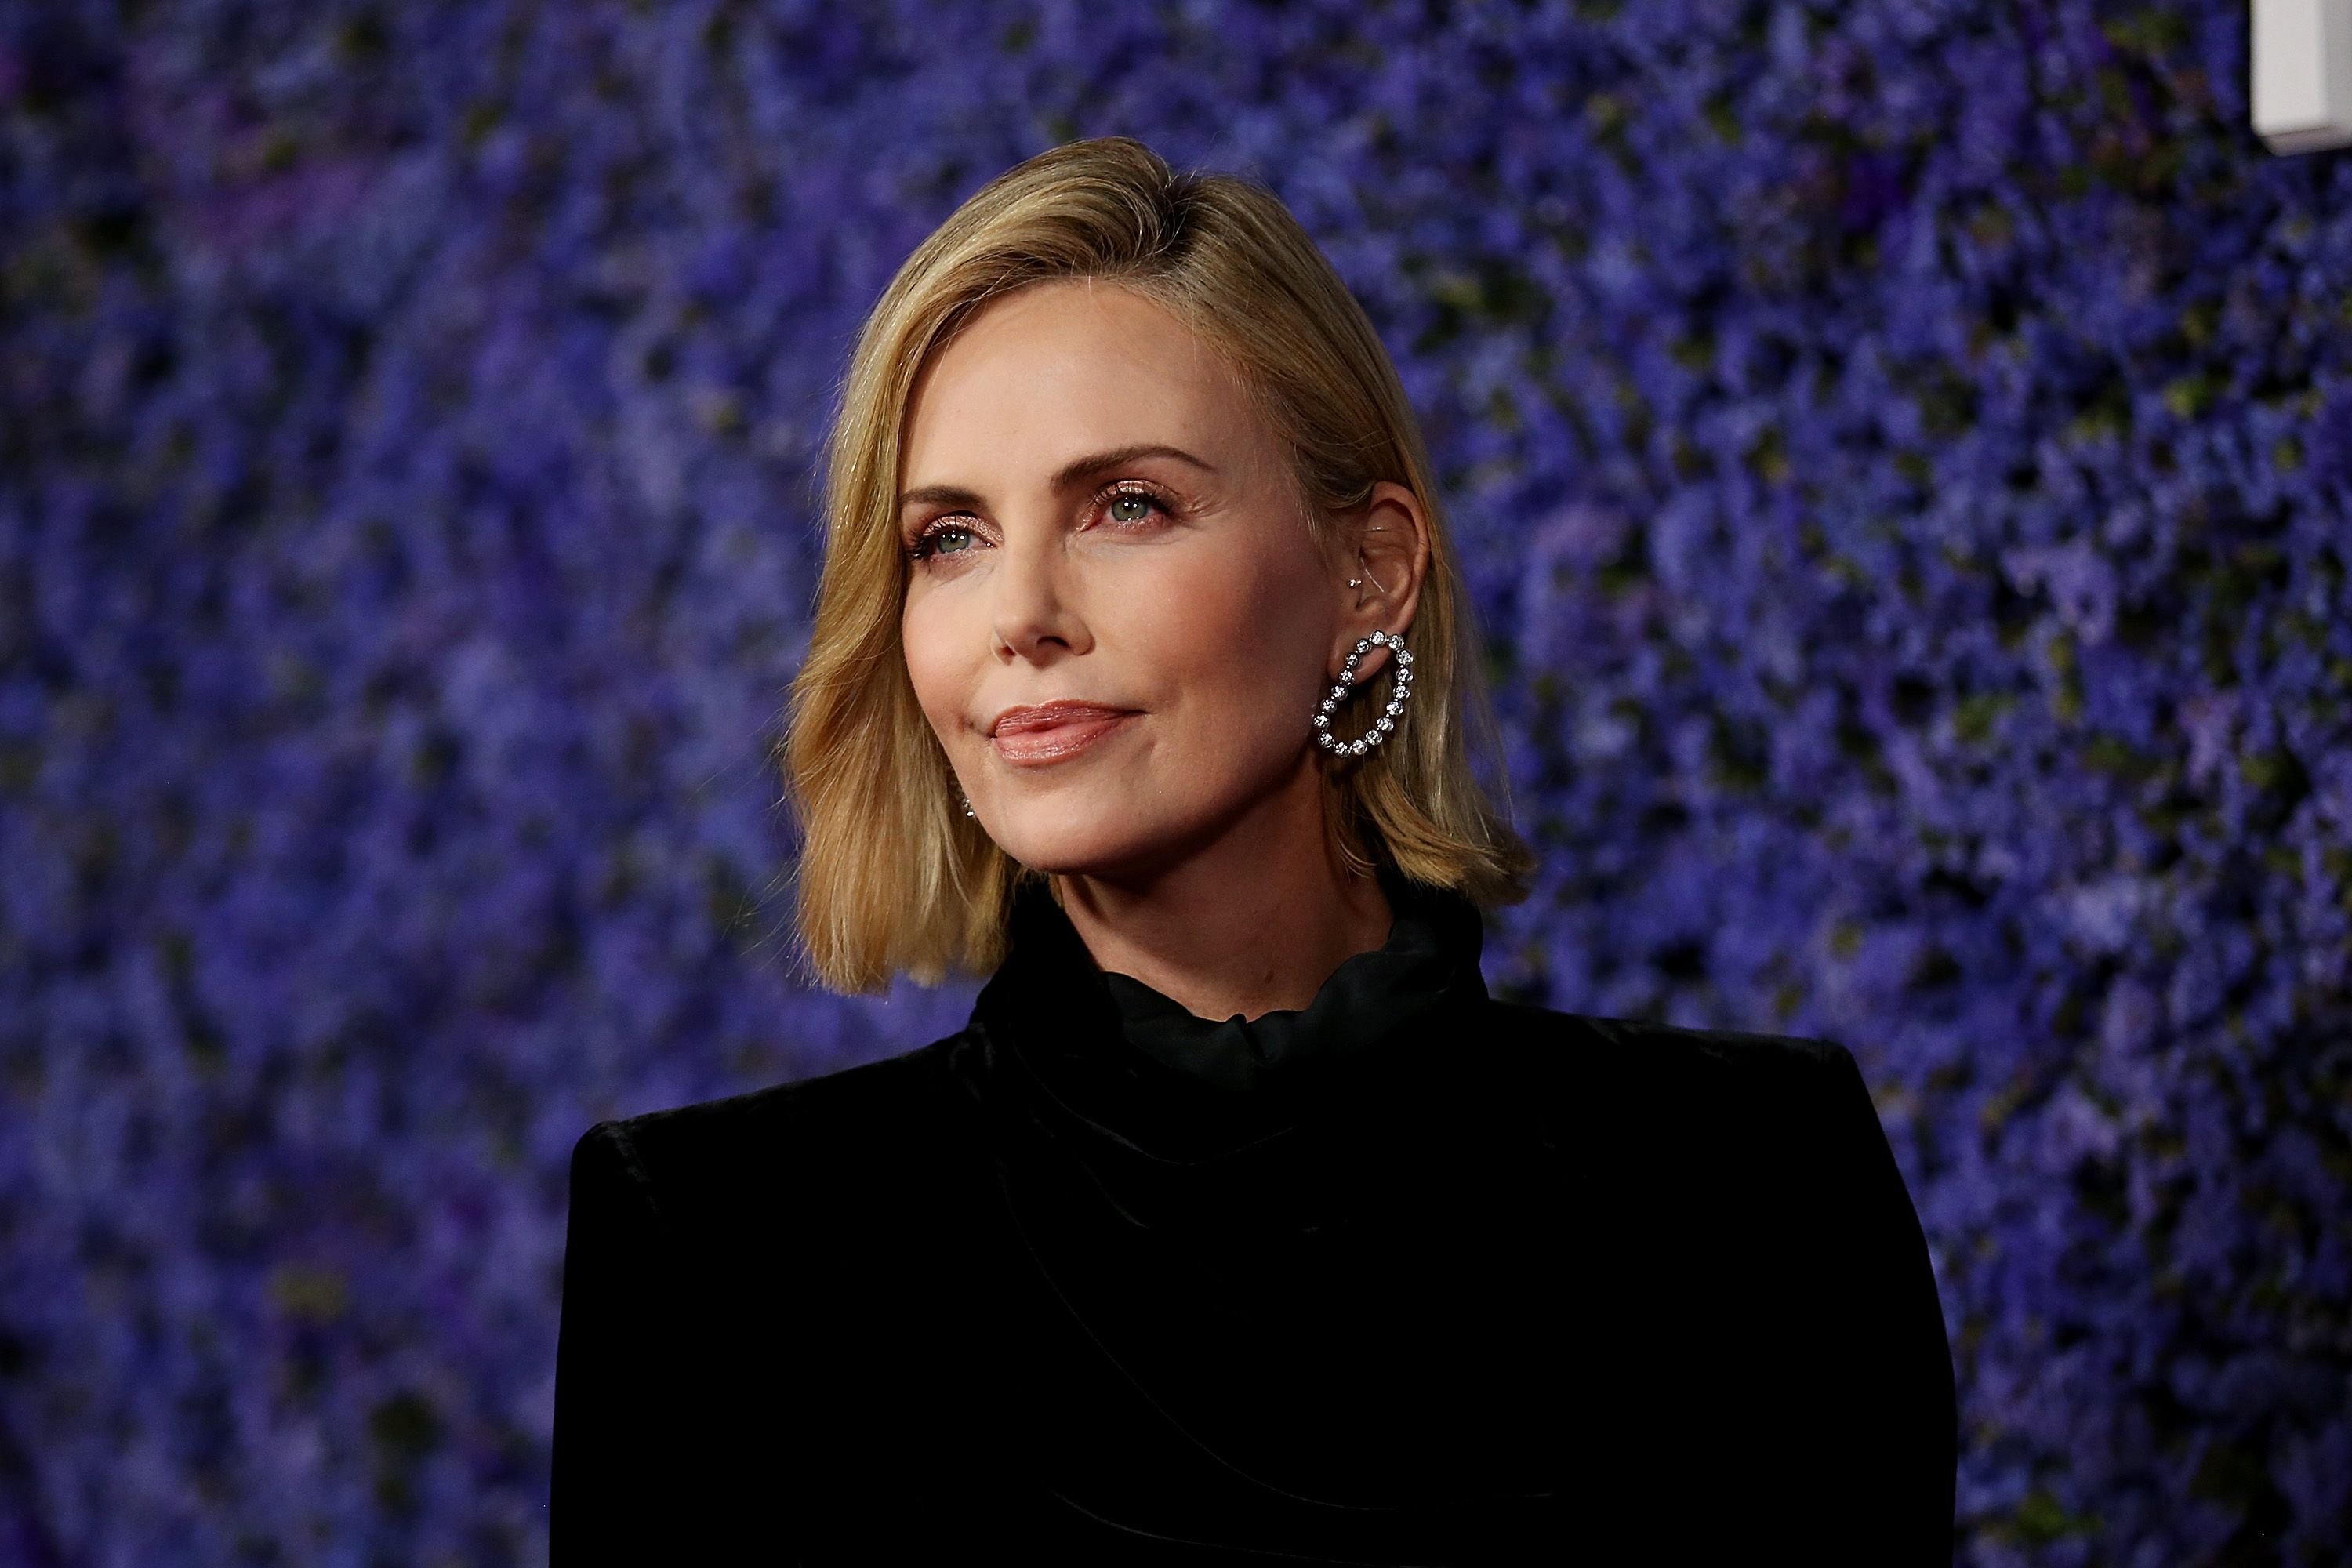 Charlize Theron attends Caruso's Palisades Village opening gala. | Source: Getty Images